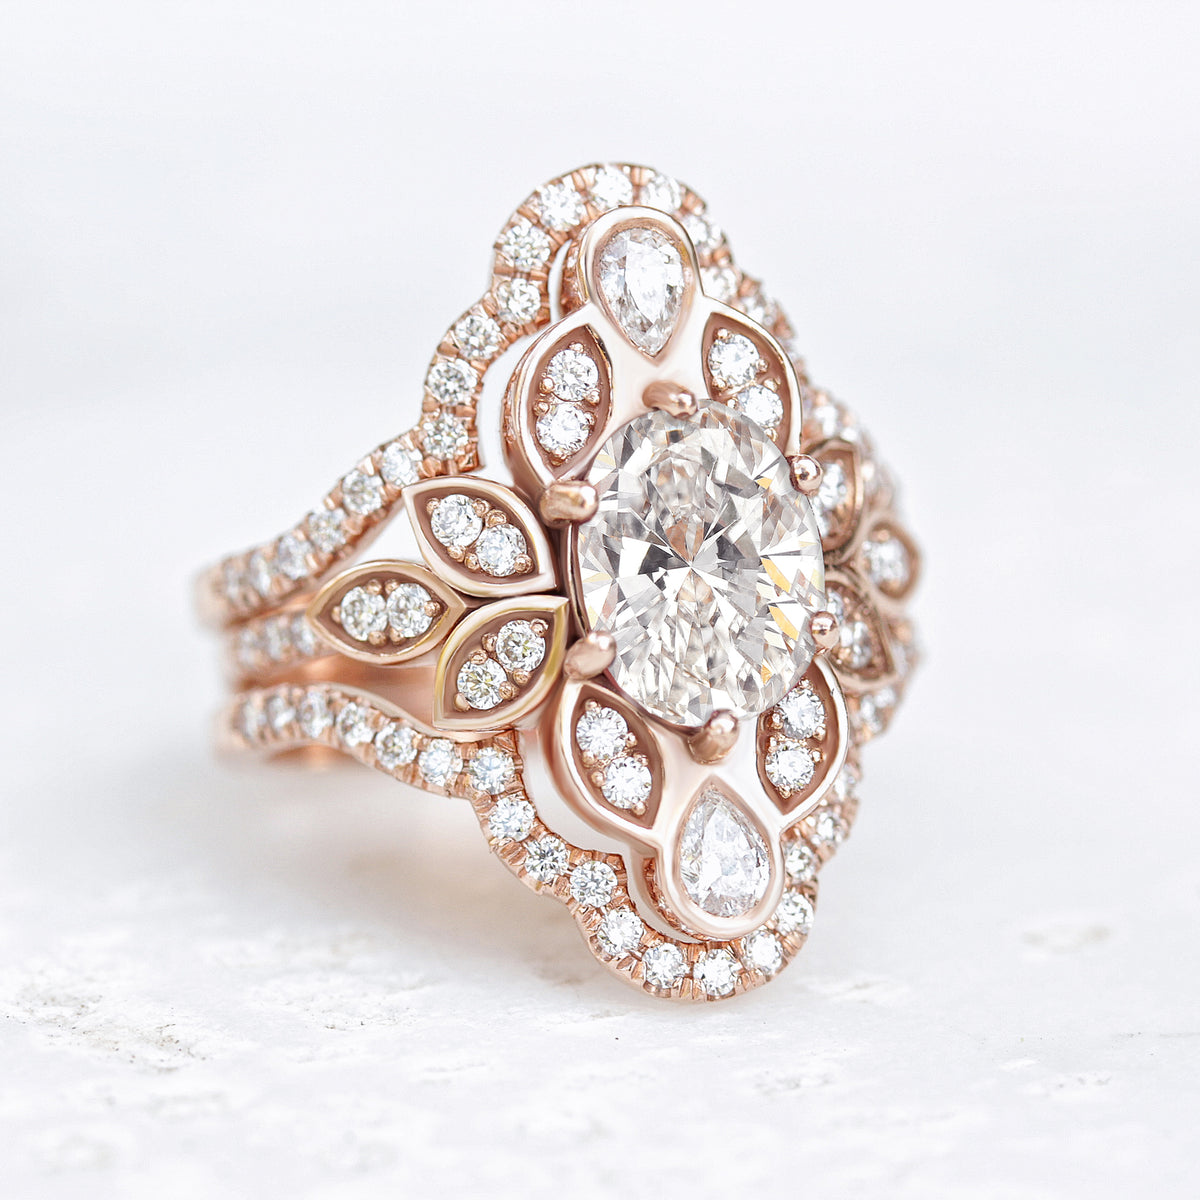 Oval Diamond Flower Engagement Ring With Pave Diamond Ring Guard Lily ...